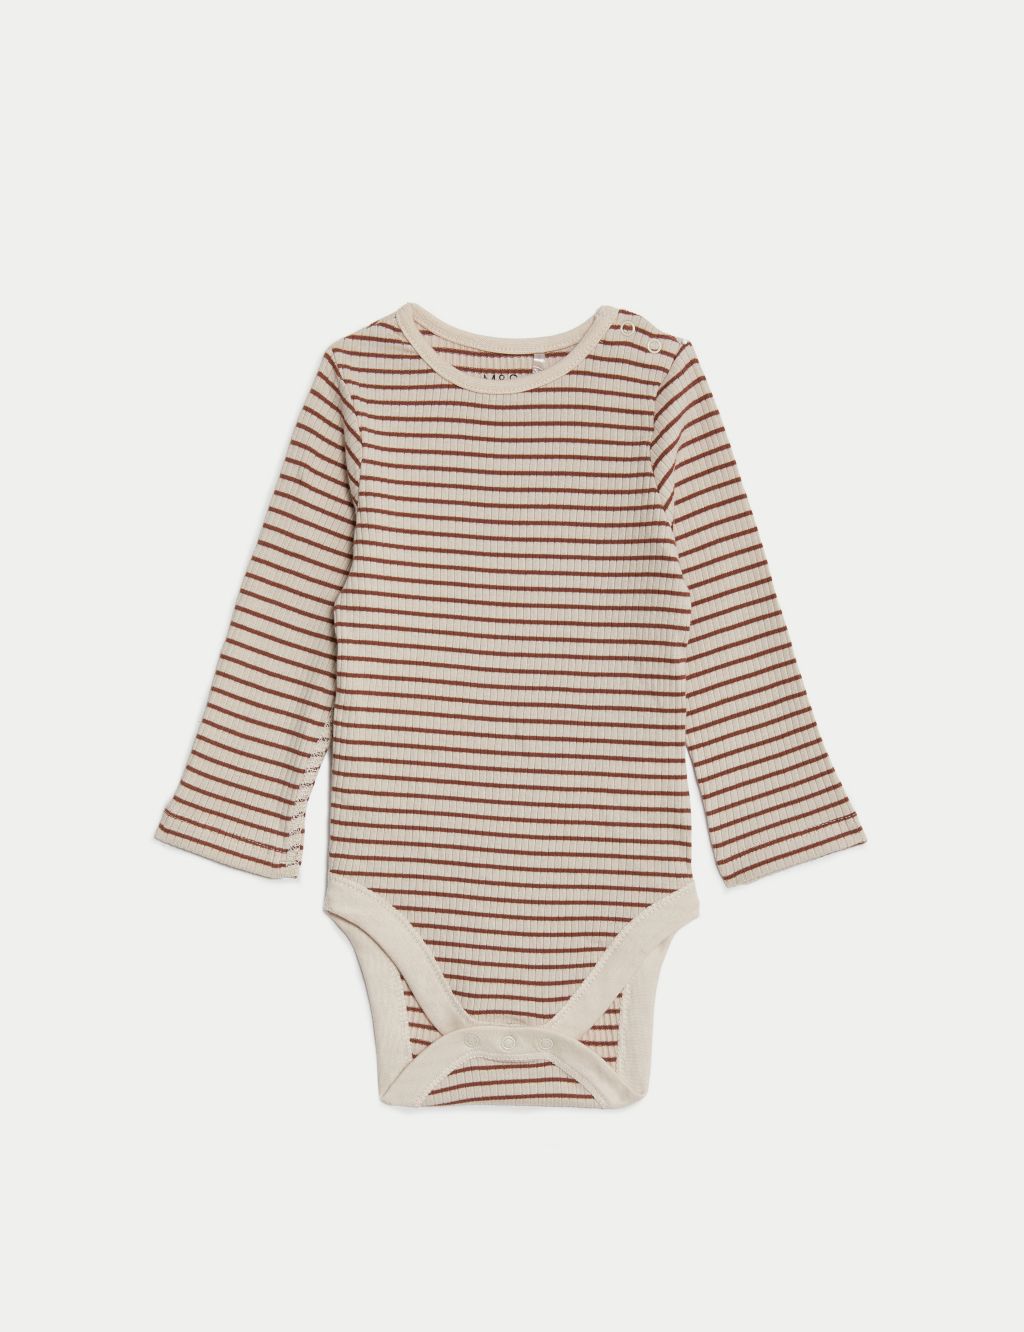 2pc Cotton Rich Striped Outfit (0-3 Yrs) image 3